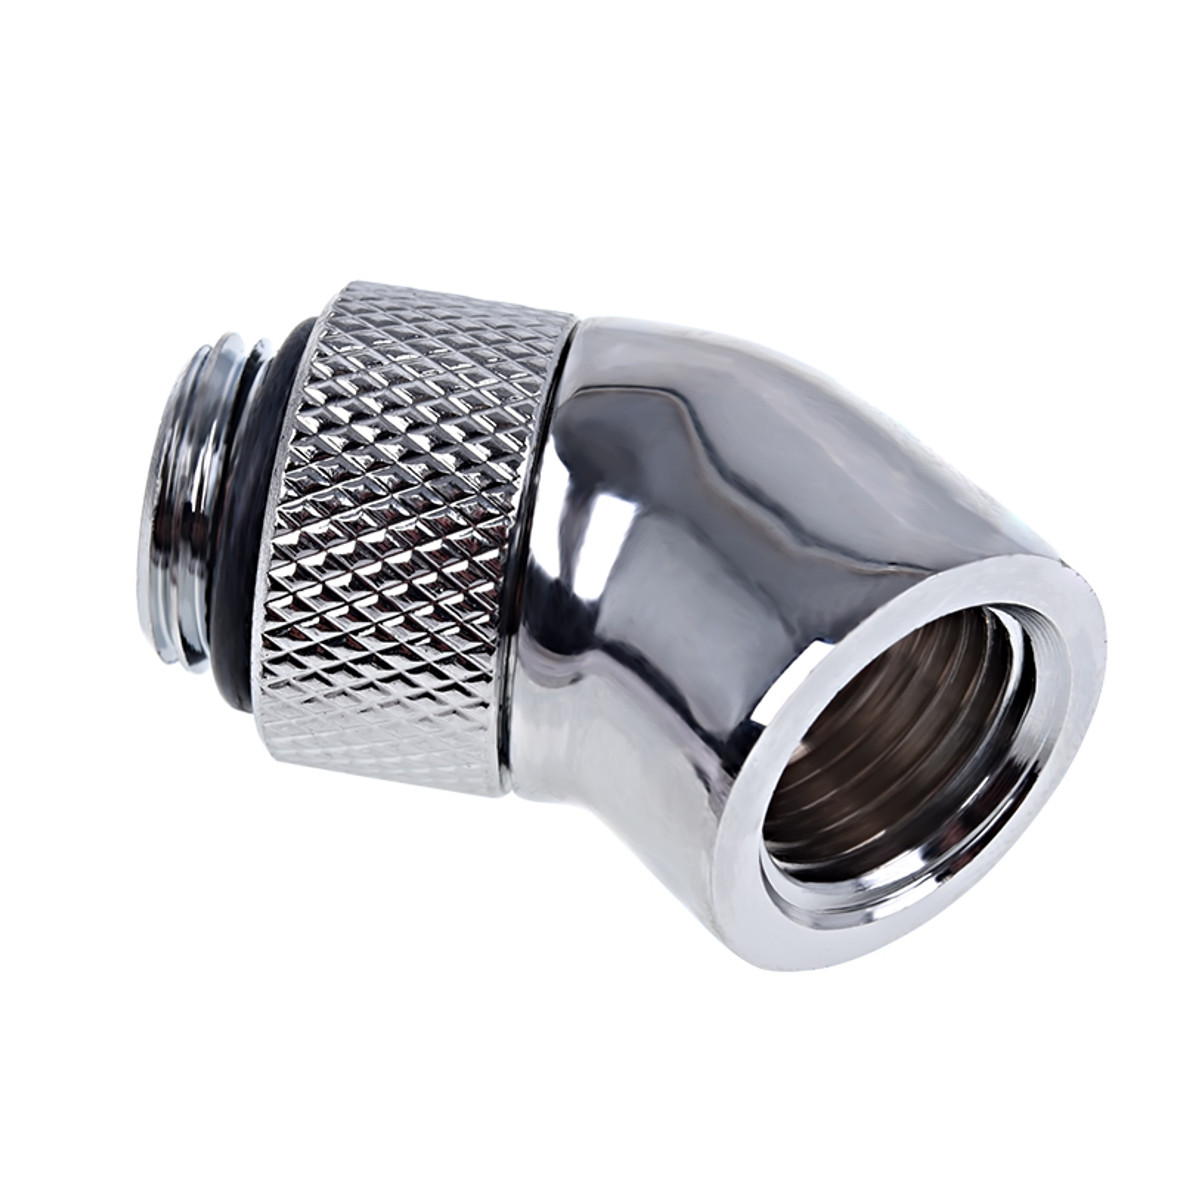 Alphacool - Alphacool Eiszapfen 45 Degree Angled Rotary Adaptor - Chrome